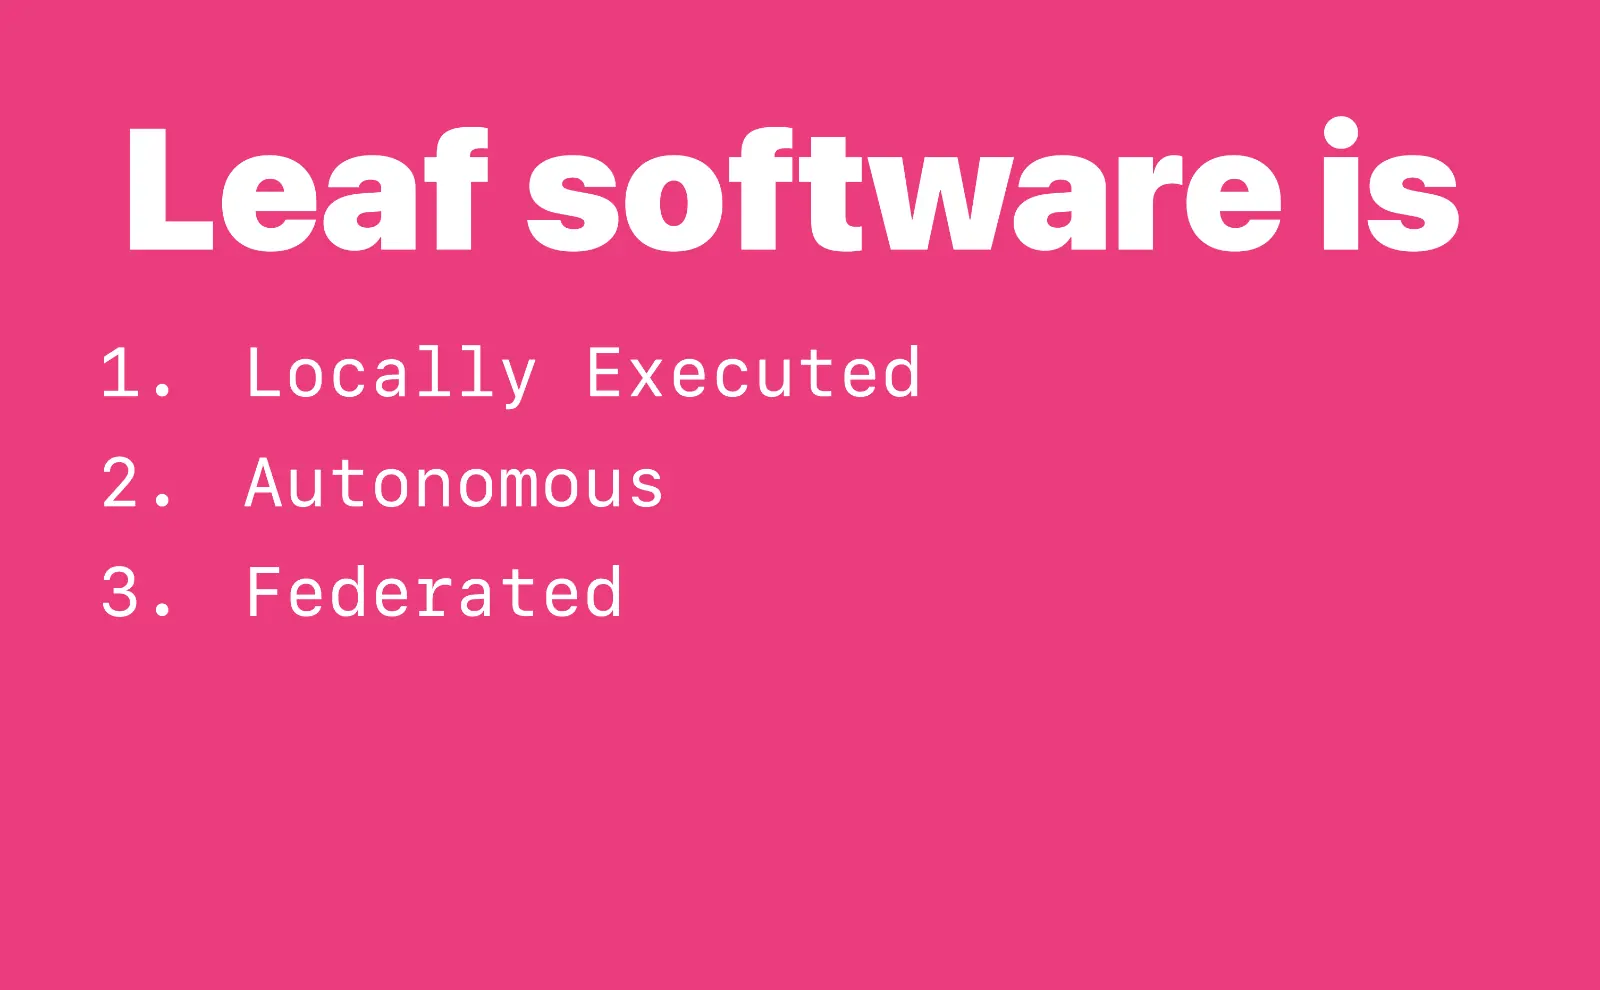 Leaf software is 3. Federated